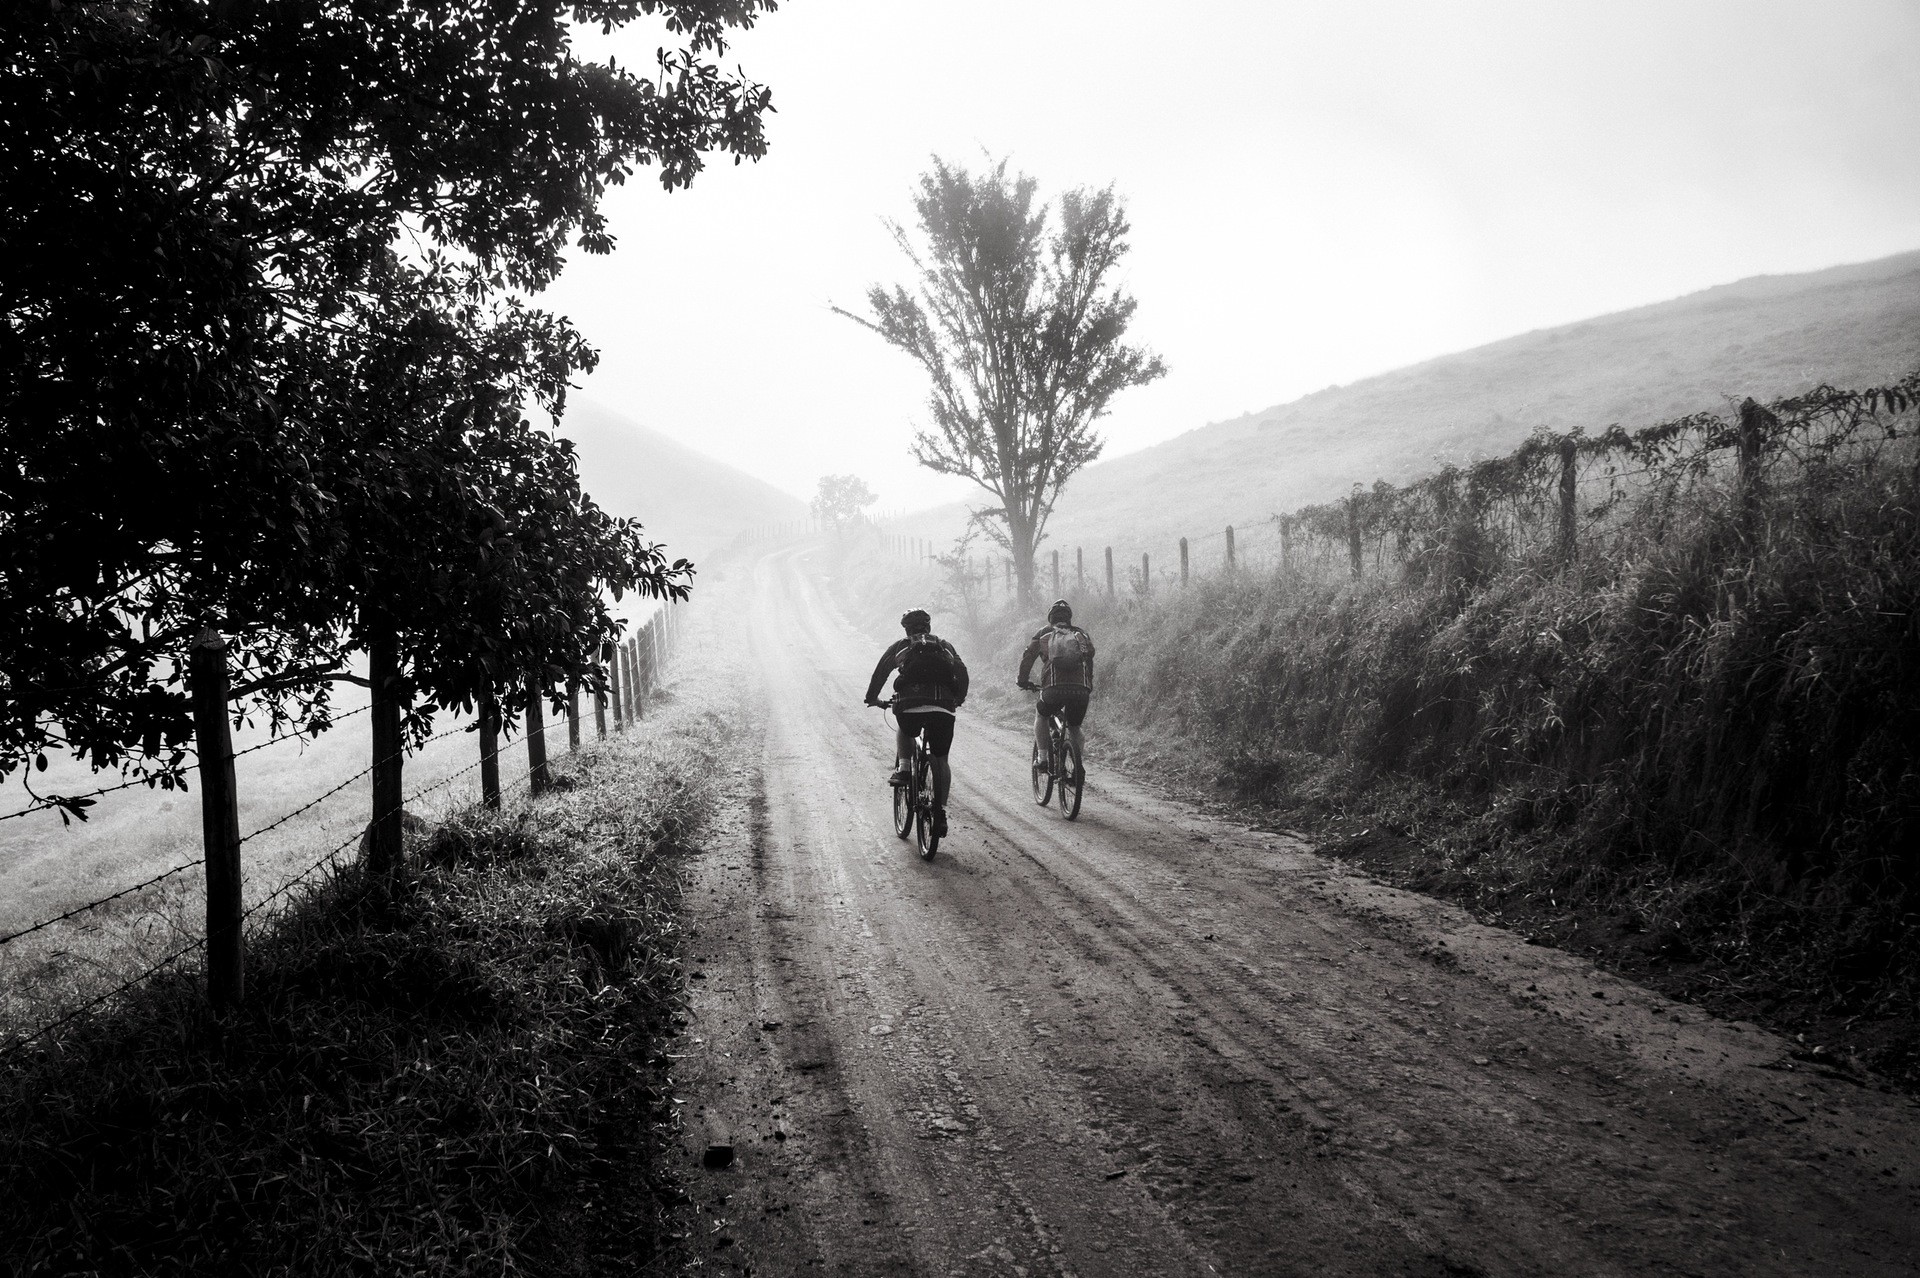 People 1920x1278 mist people road landscape bicycle outdoors vehicle dirt road trees